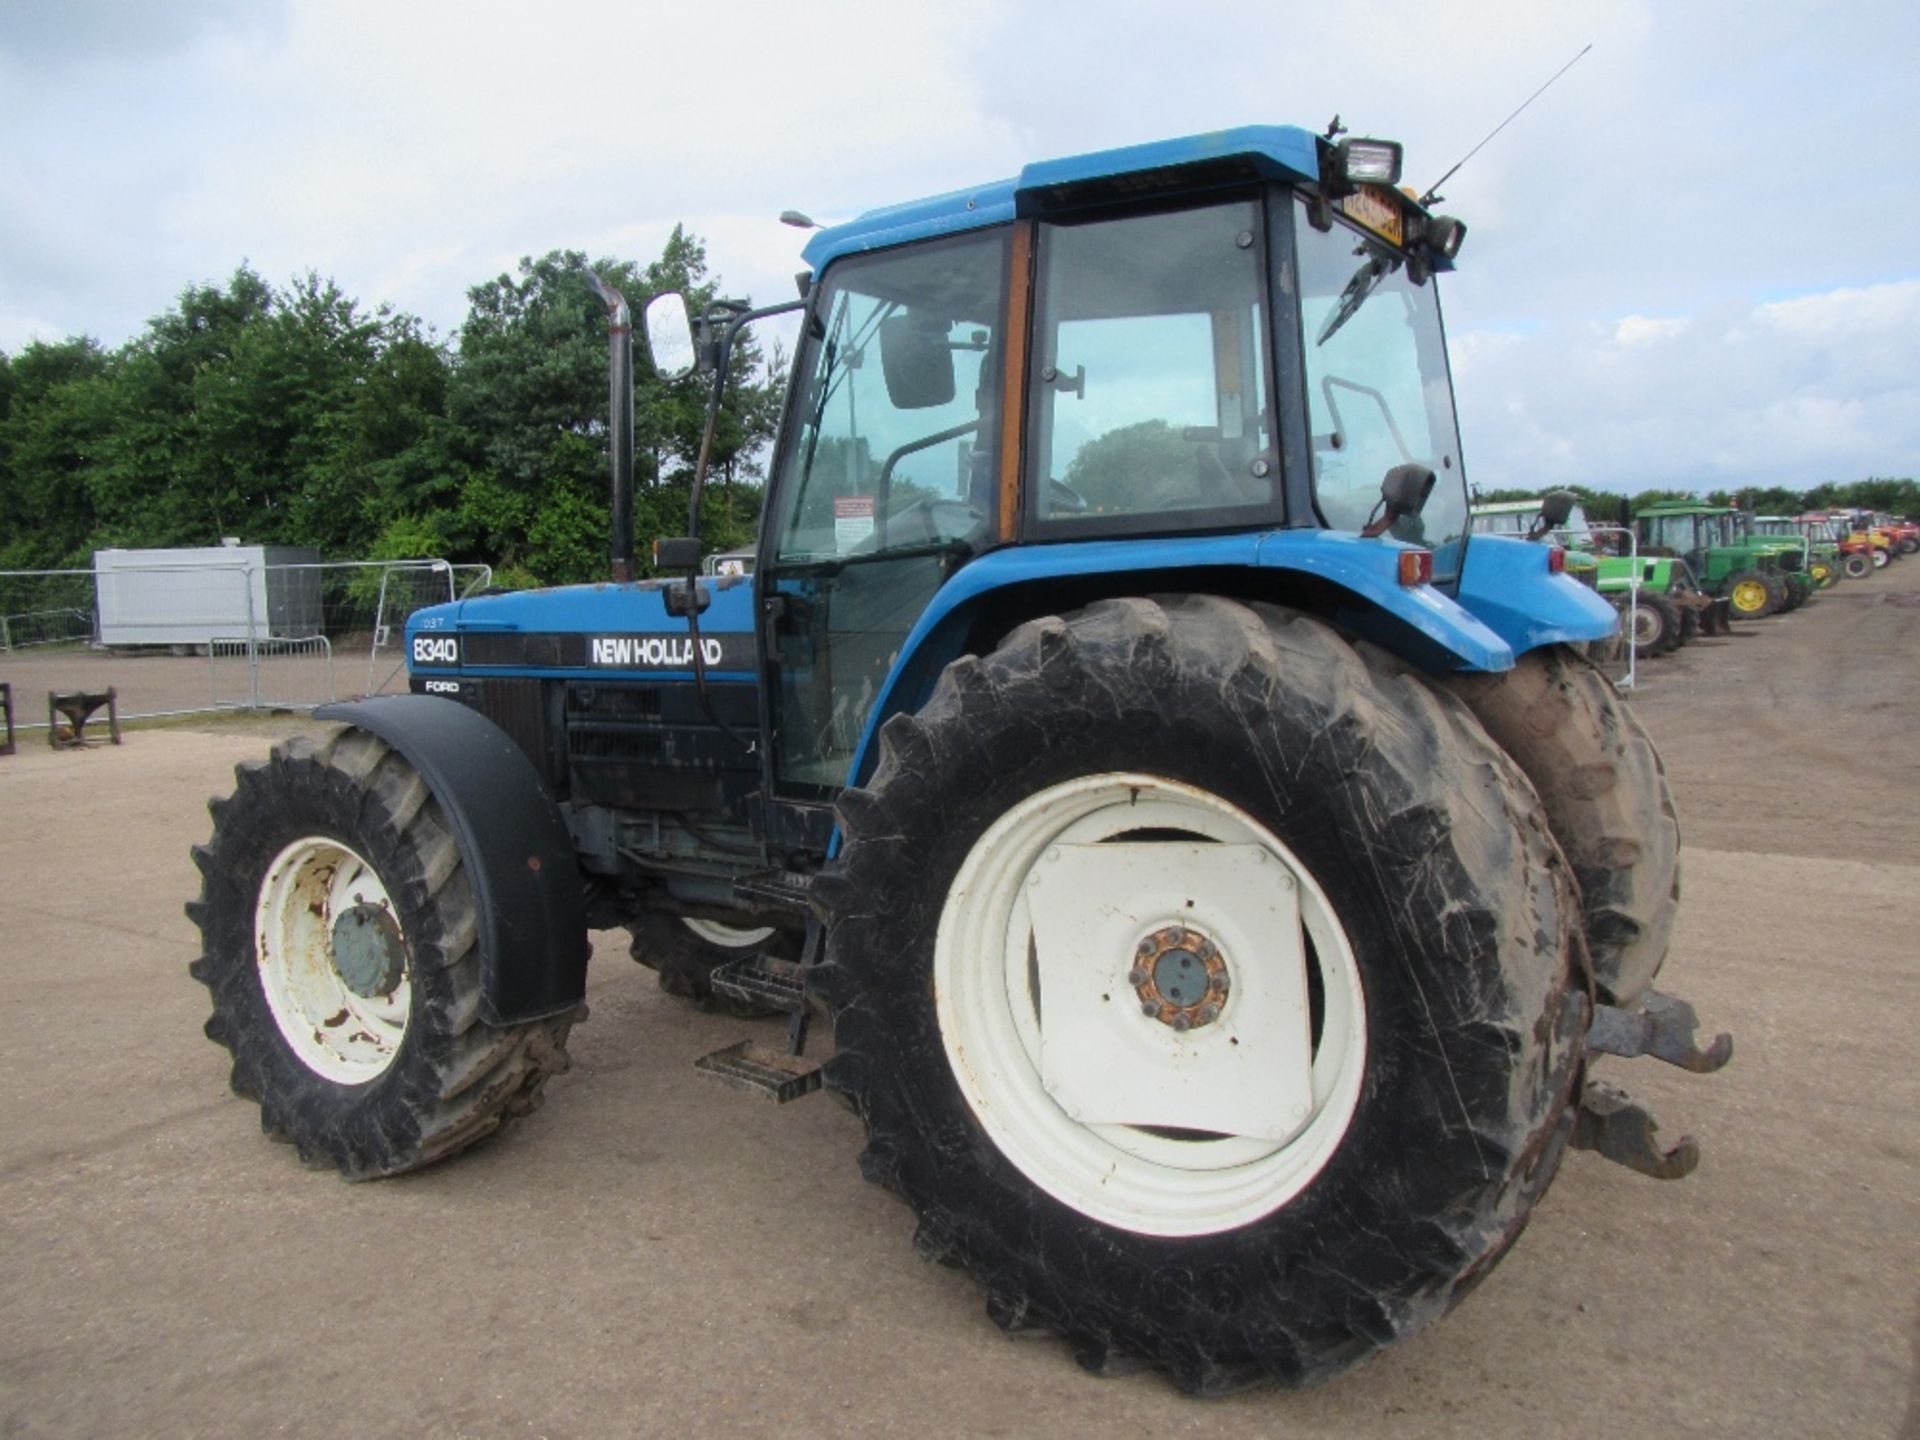 New Holland 8340 SLE 4wd Tractor. V5 will be supplied Reg. No. N243 SCN Ser. No. 025324B - Image 9 of 17